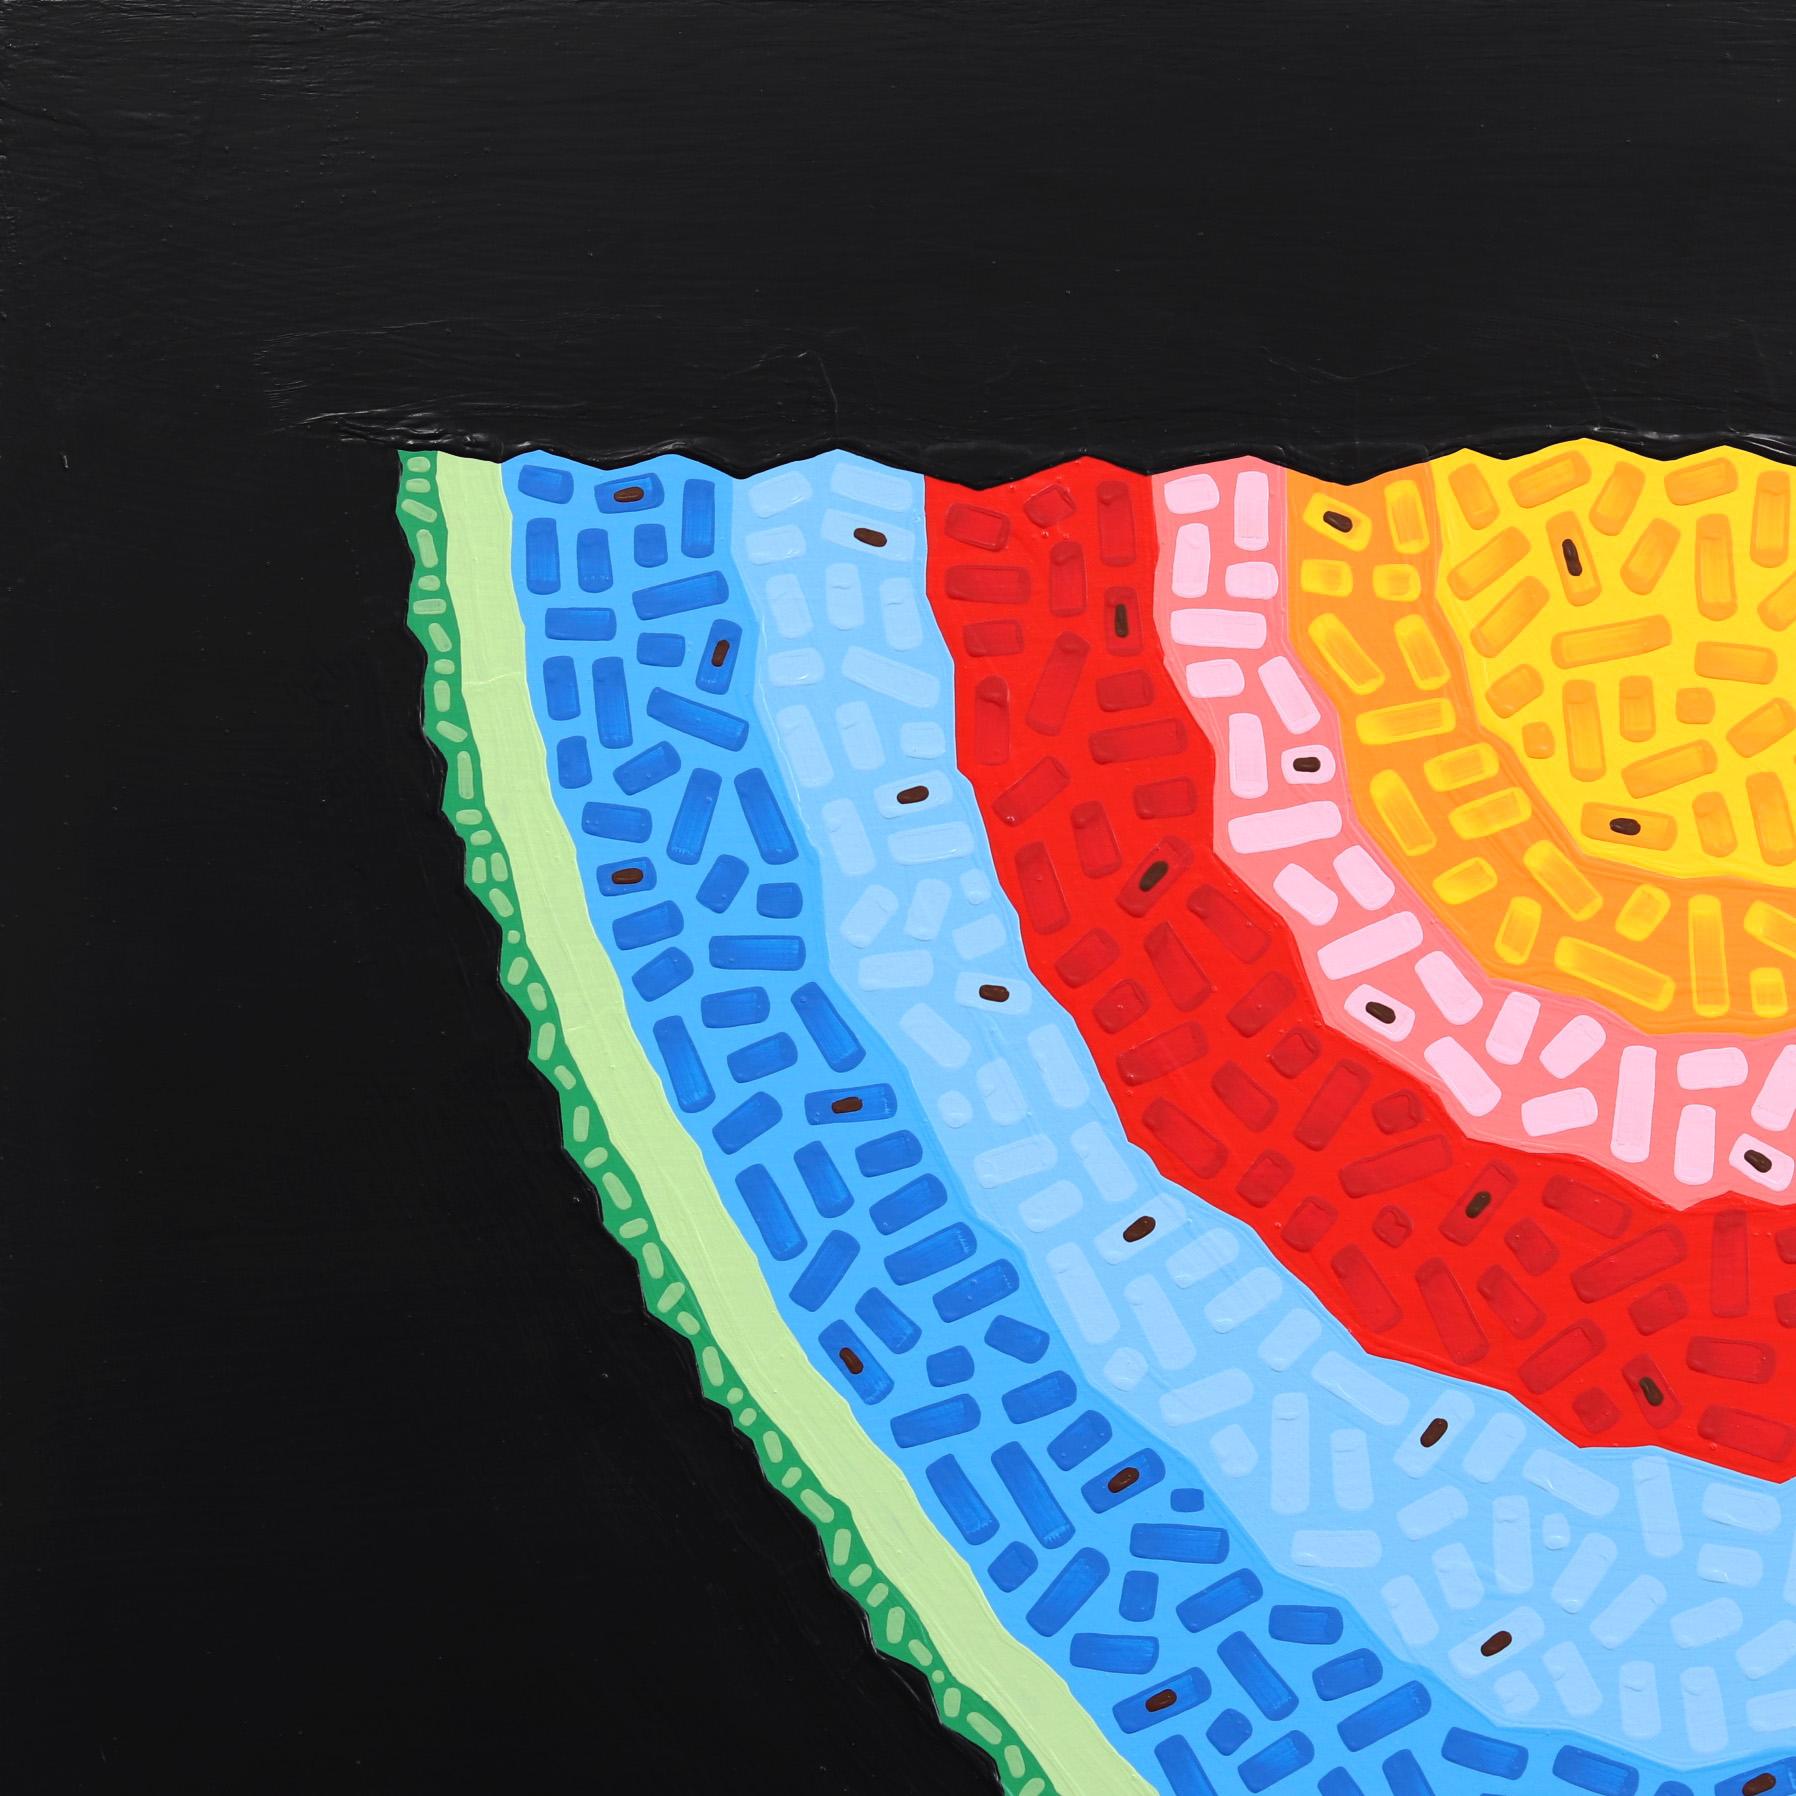 All Melon - Vibrant Colorful Southwest Inspired Pop Art Fruit Painting - Black Landscape Painting by Will Beger